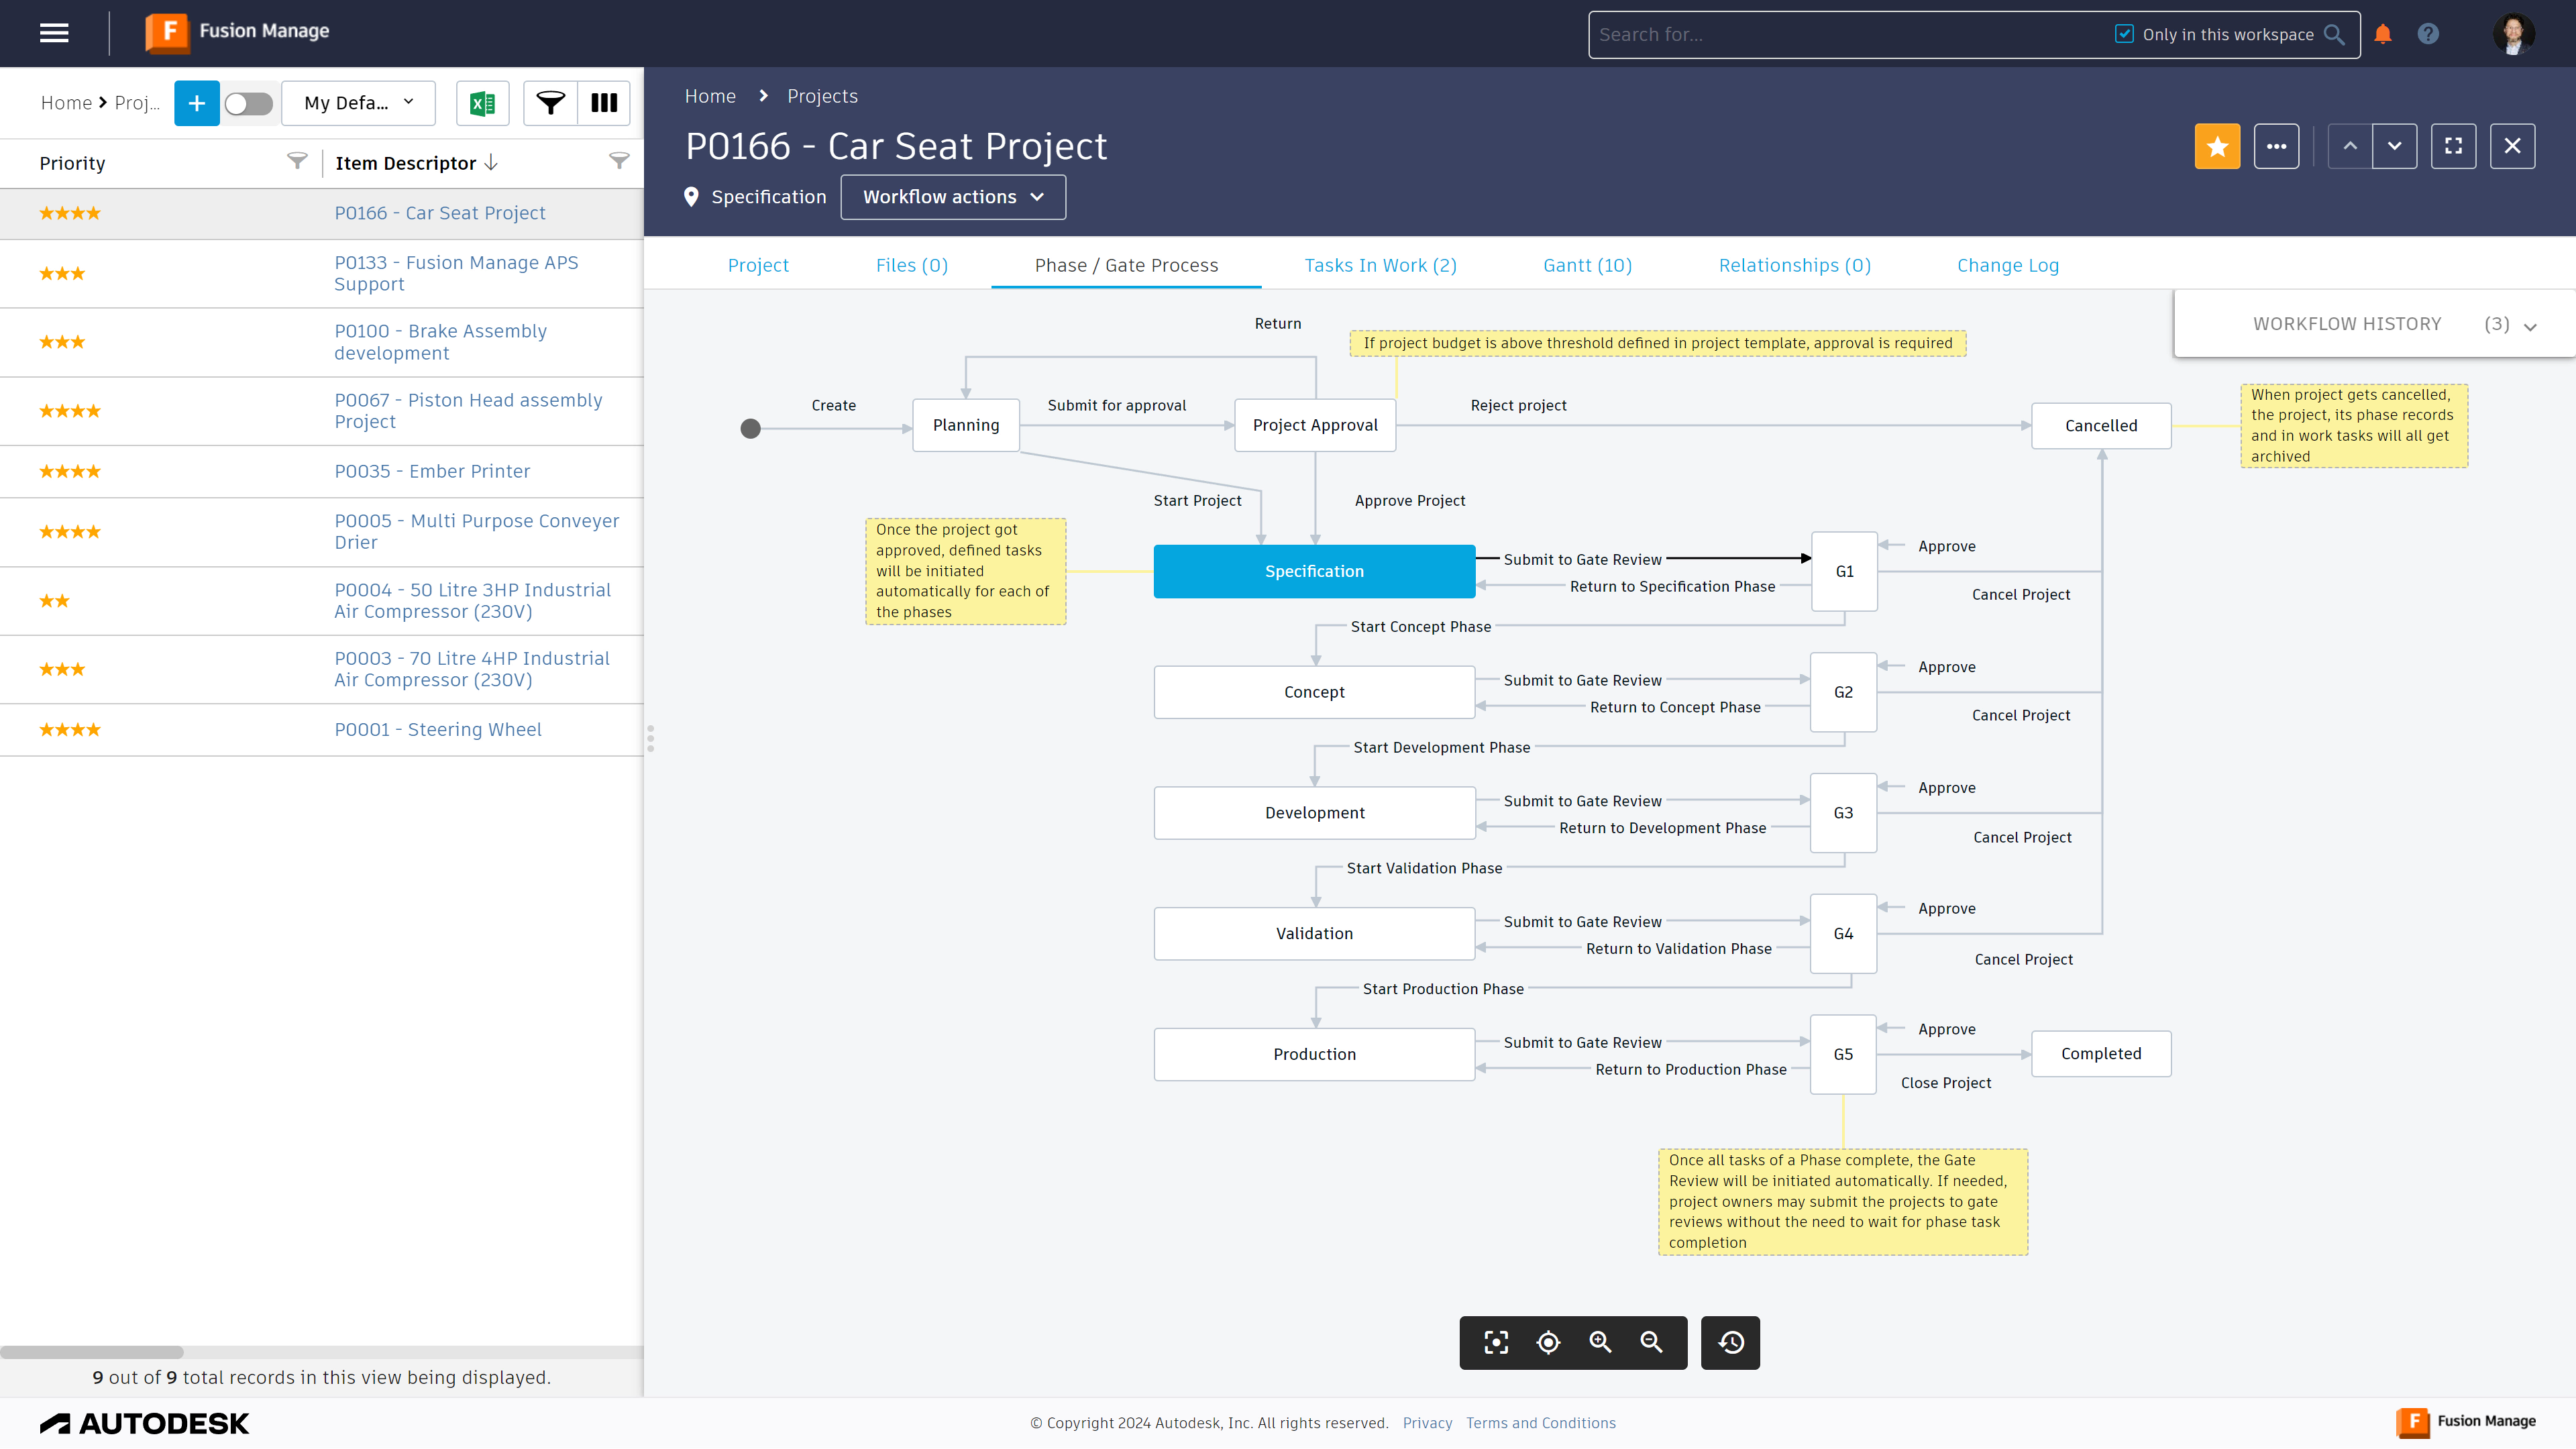 New product introduction: Keep product development projects organized by managing stakeholders from various departments aligned on tasks and deliverables needed to define, develop, and launch a new product. 